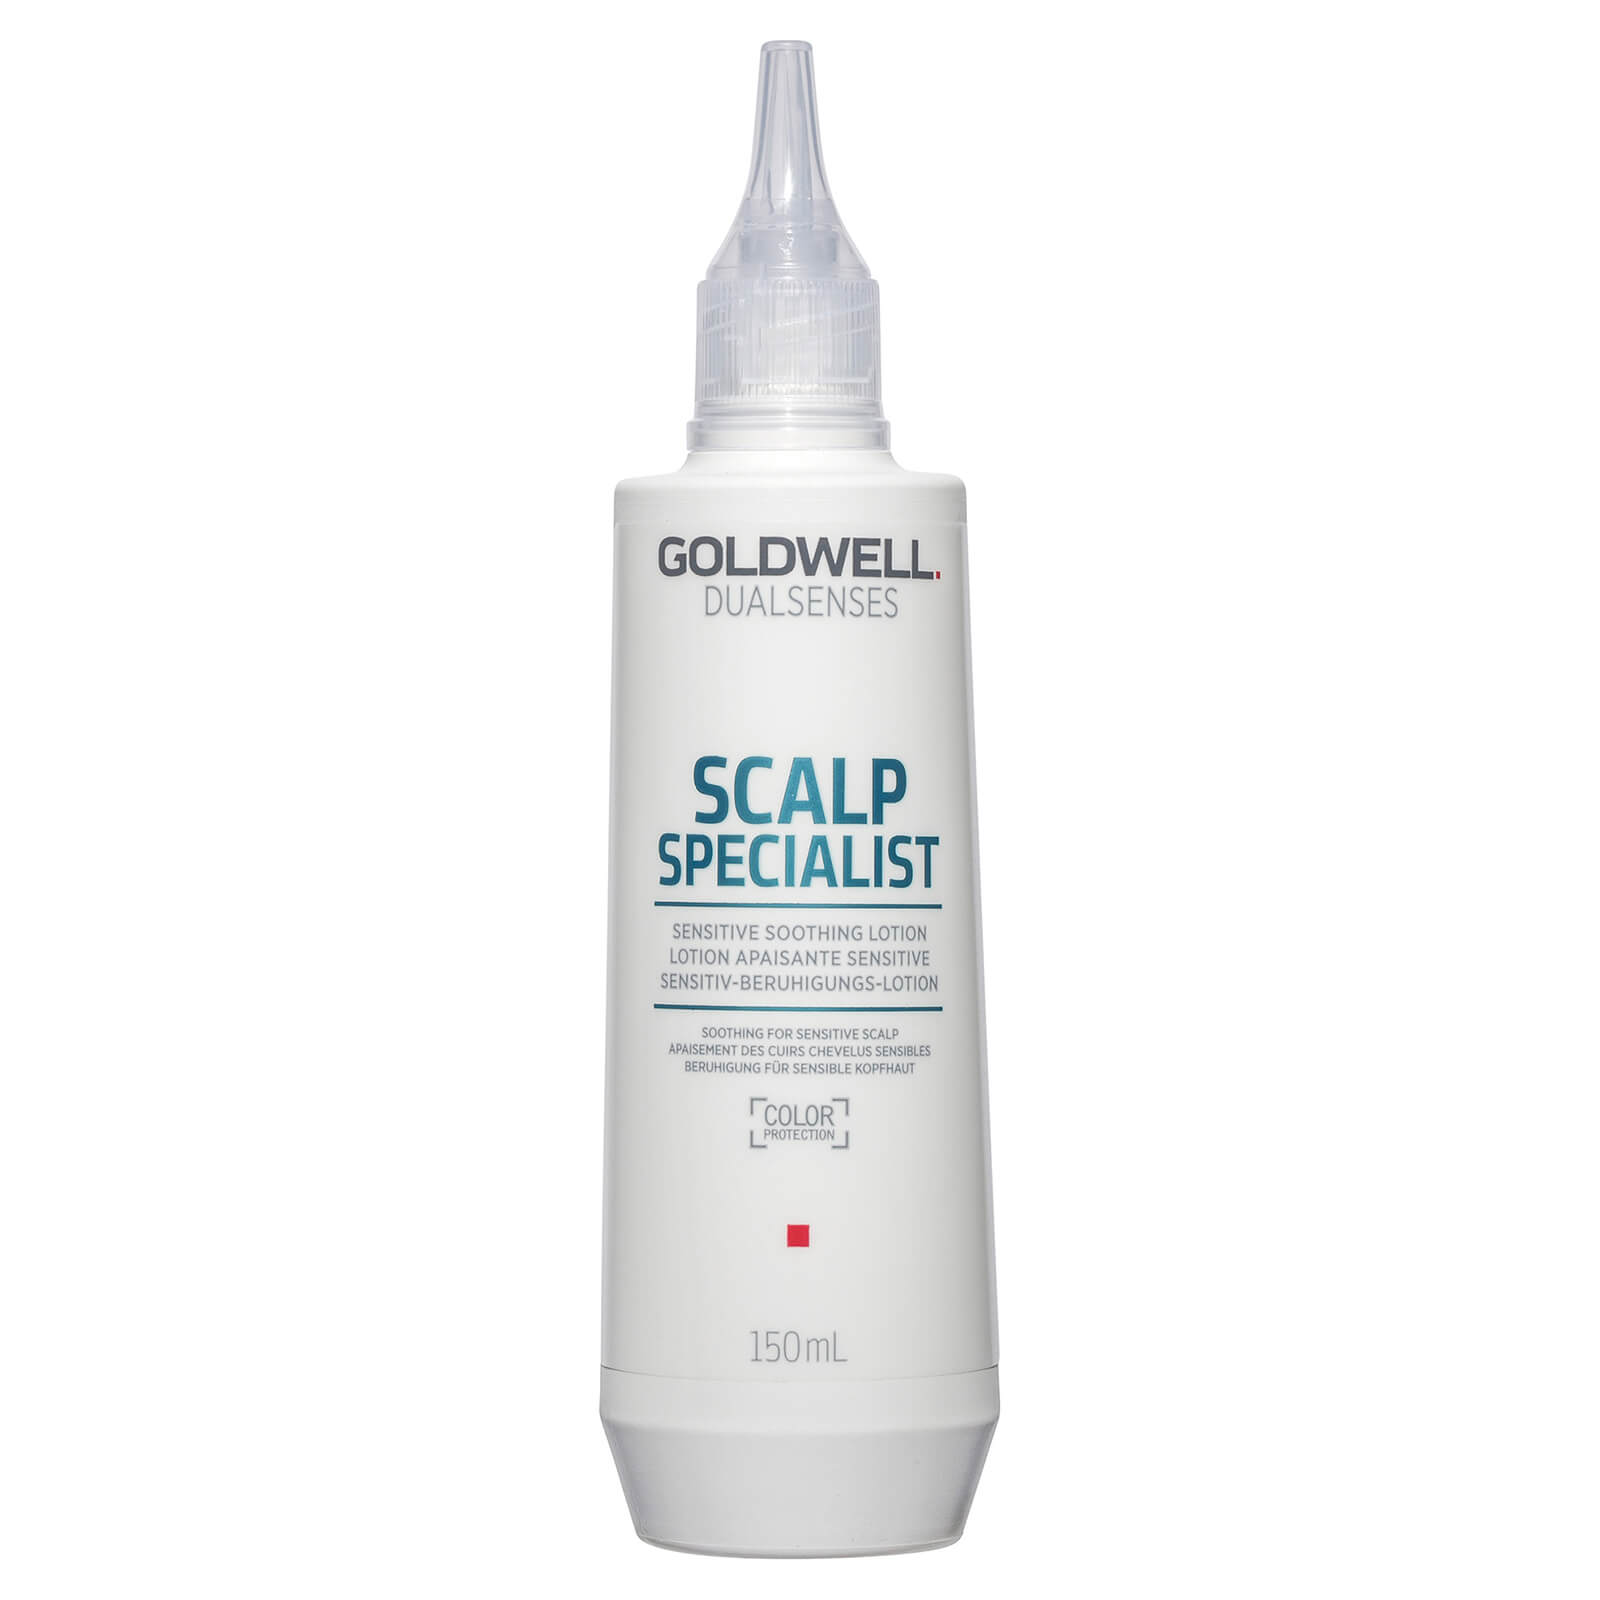 Image of Goldwell Dualsenses Scalp Specialist Sensitive Soothing Lotion 150ml